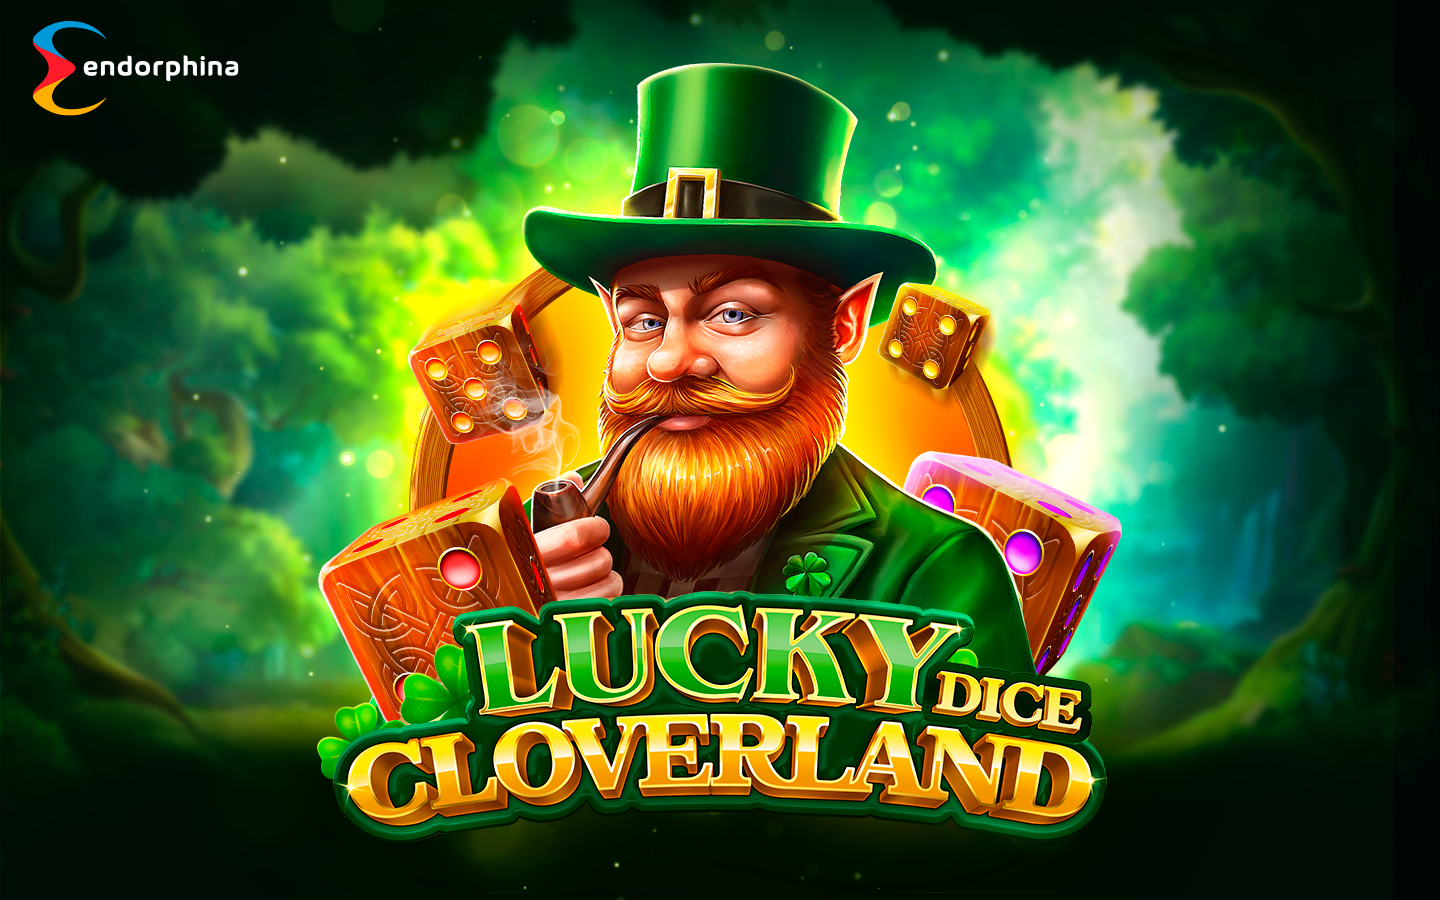 ENDORPHINA GAMES | New Game Release Lucky Cloverland Dice